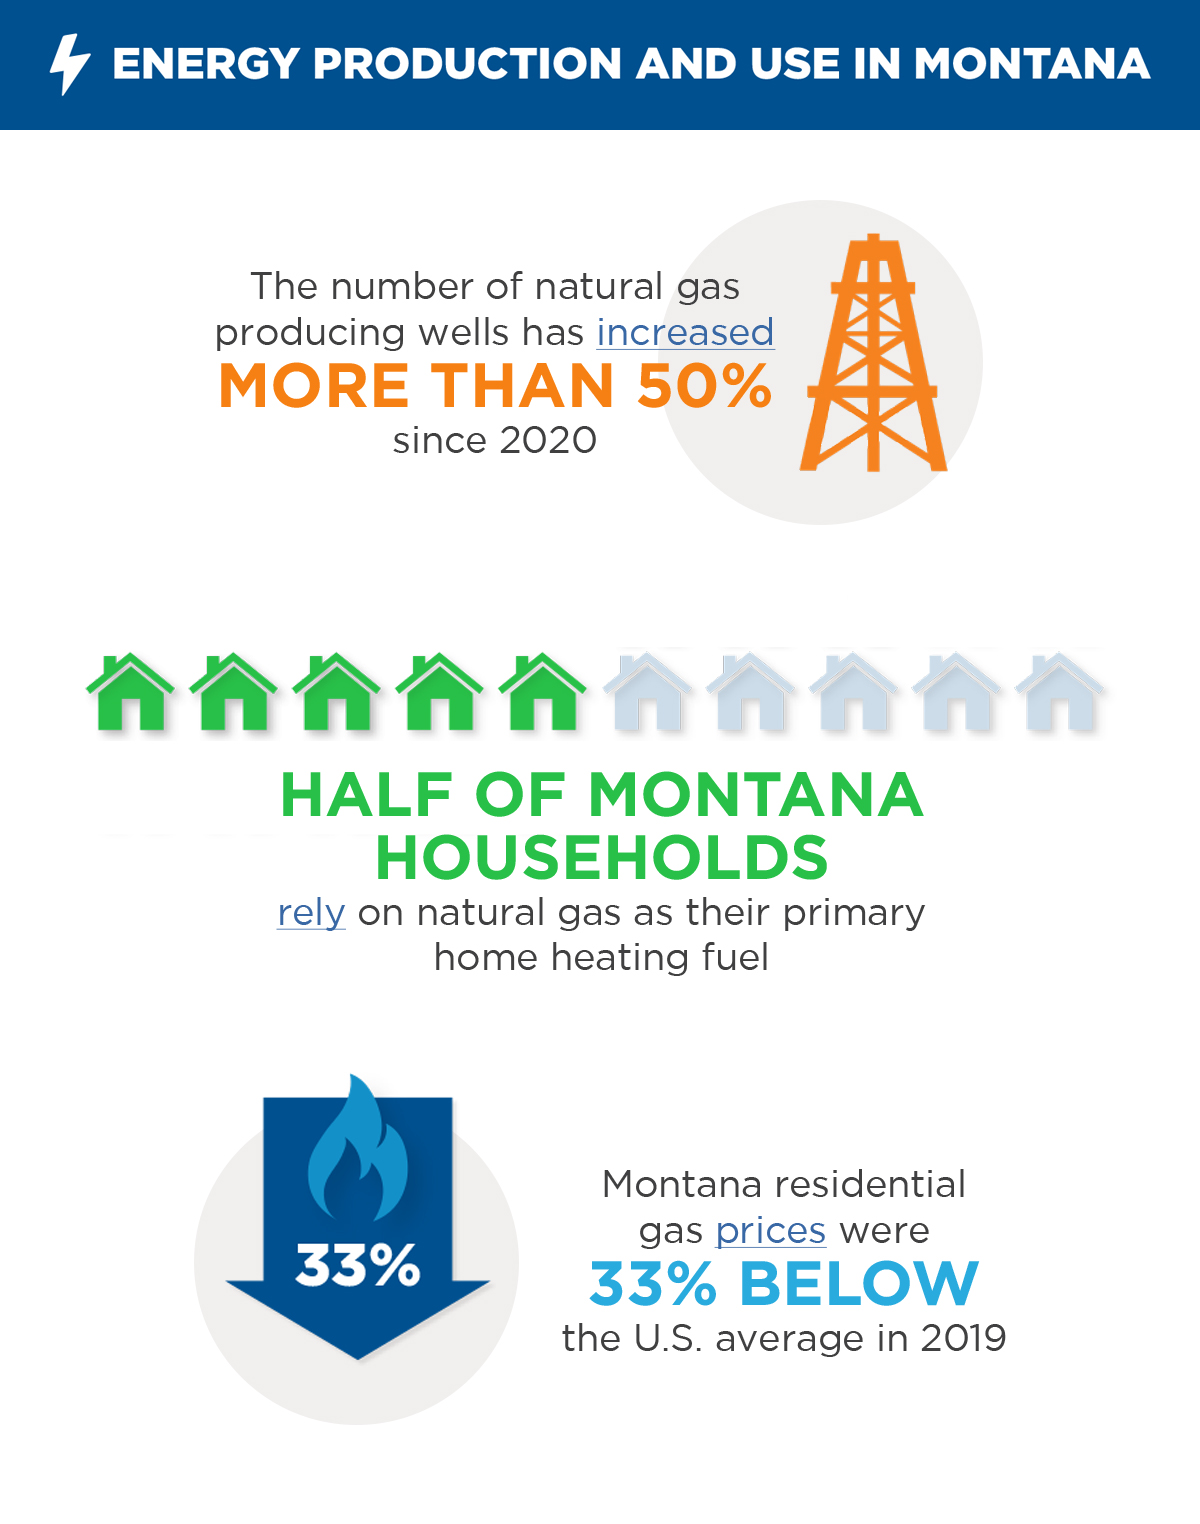 The benefits of natural gas for Montana